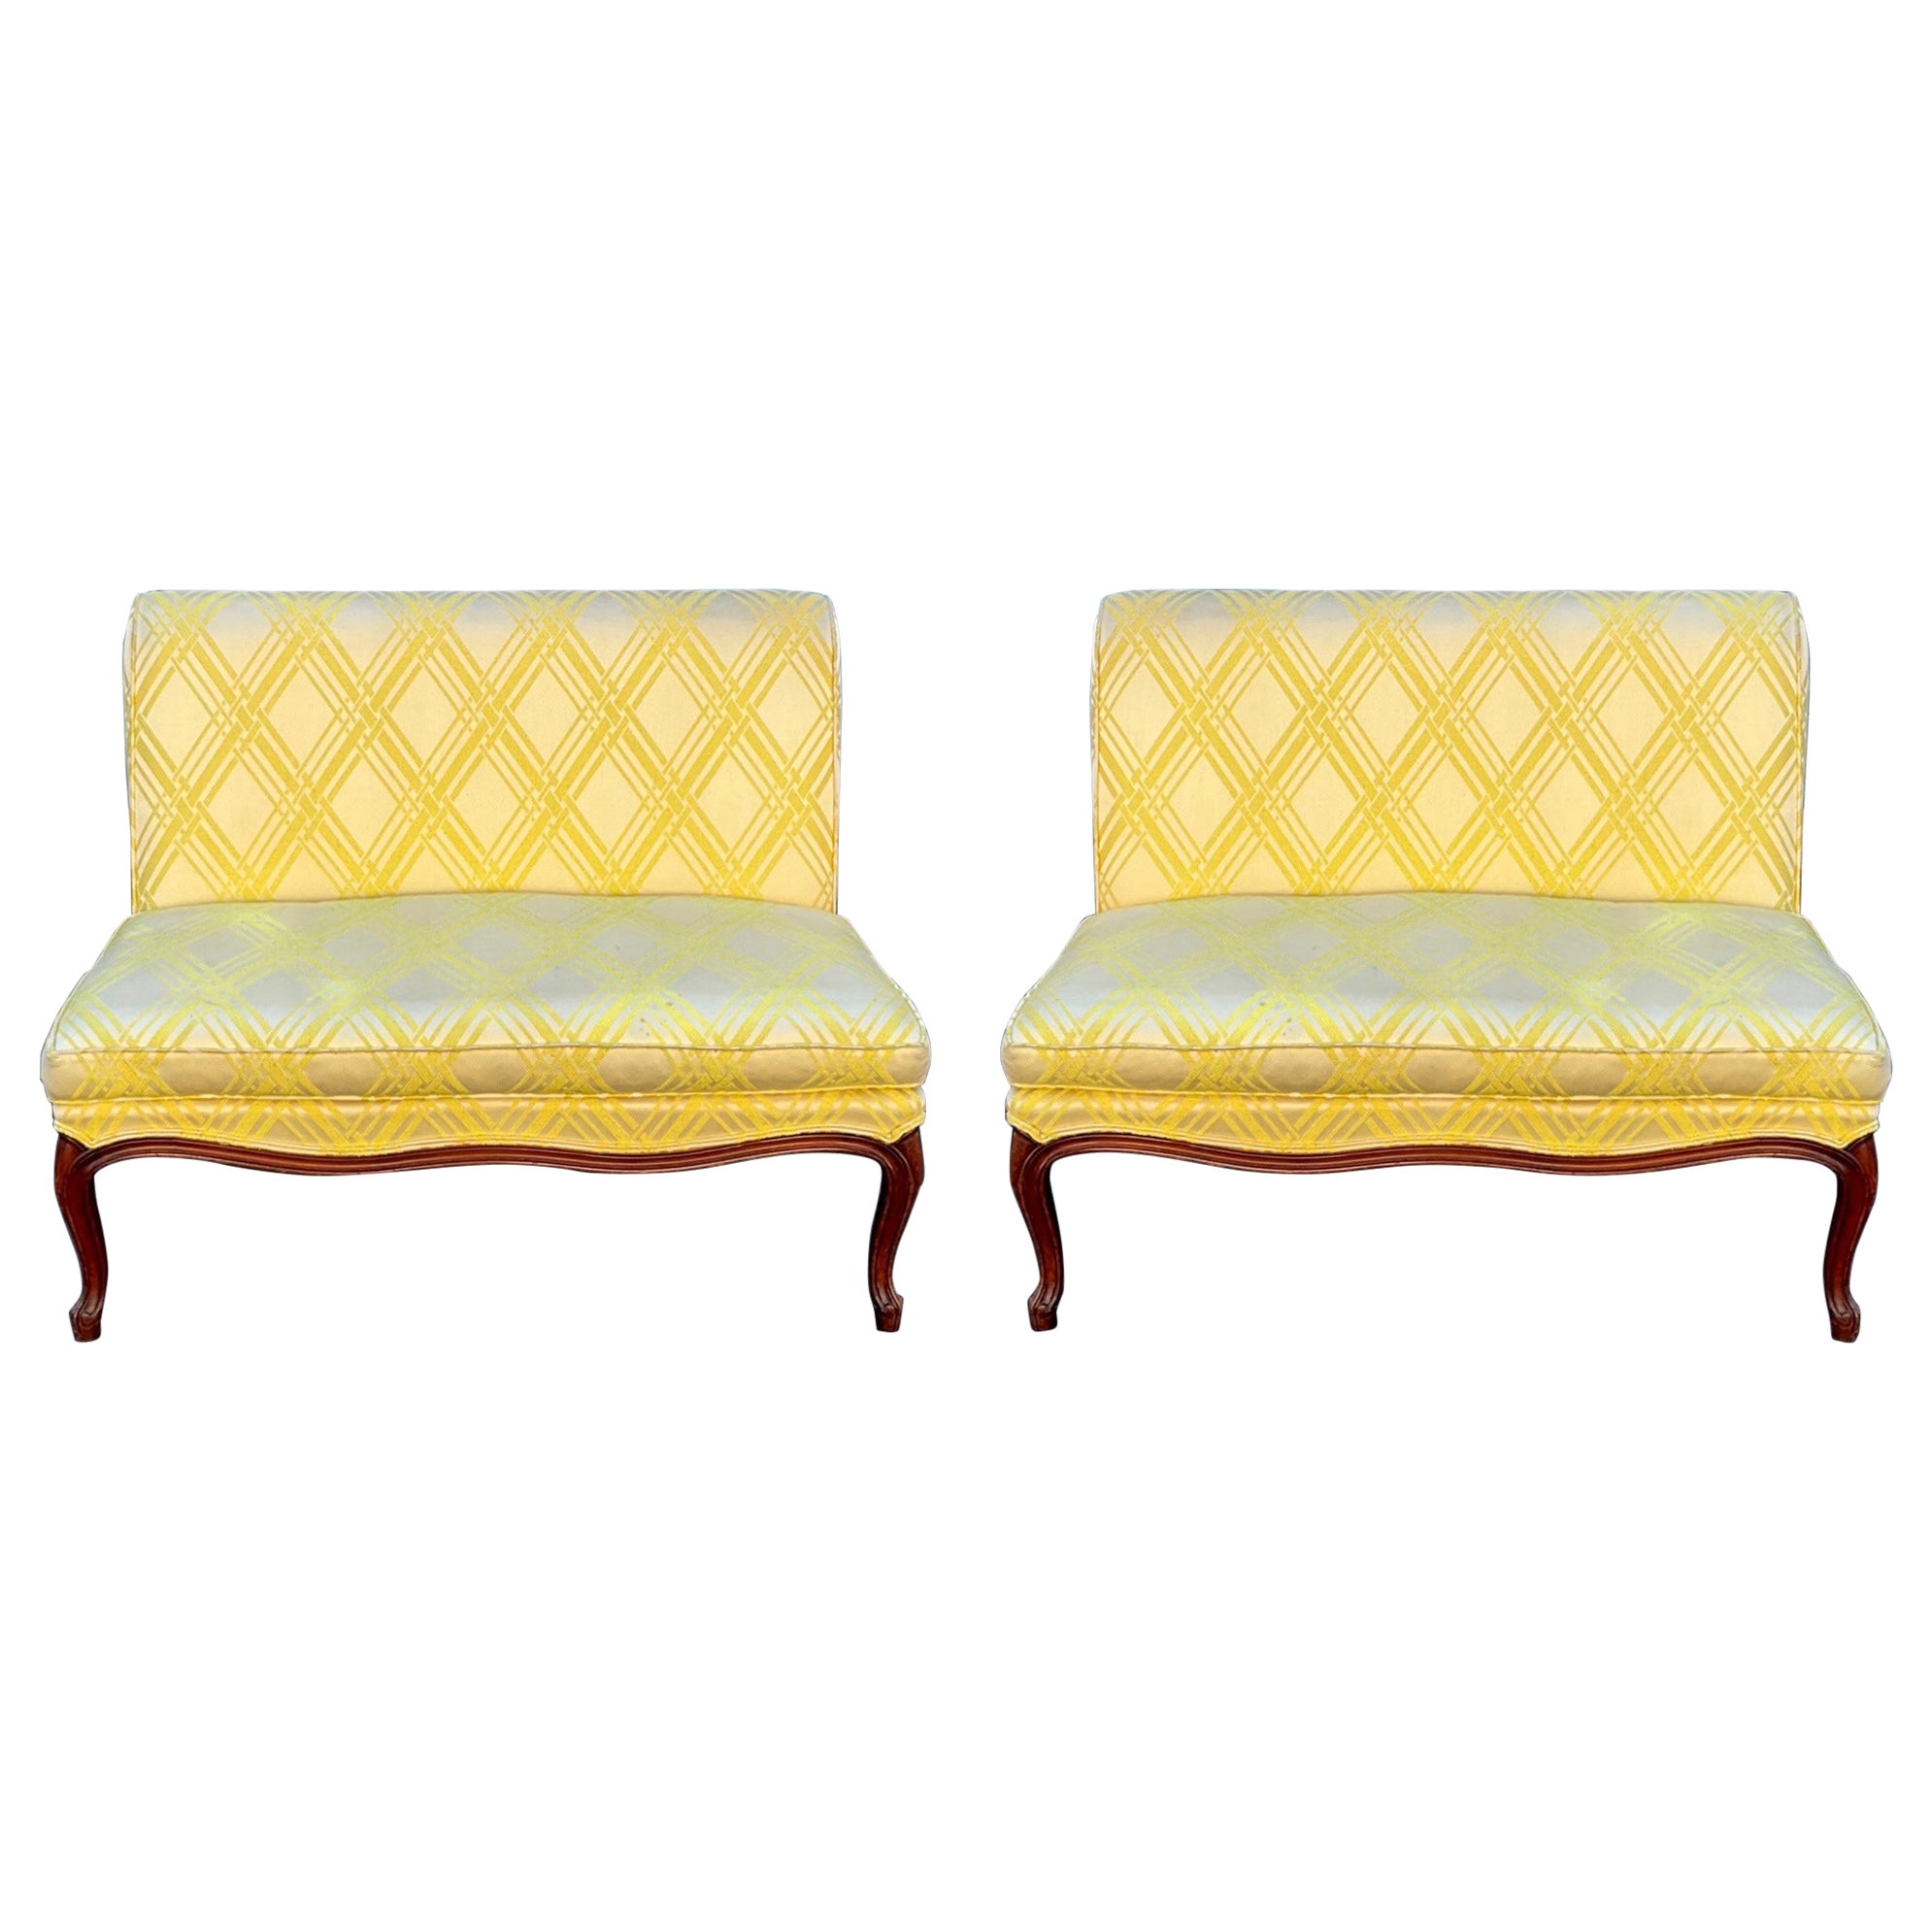 Midcentury French Provincial Style Settees in Regency Yellow, Pair